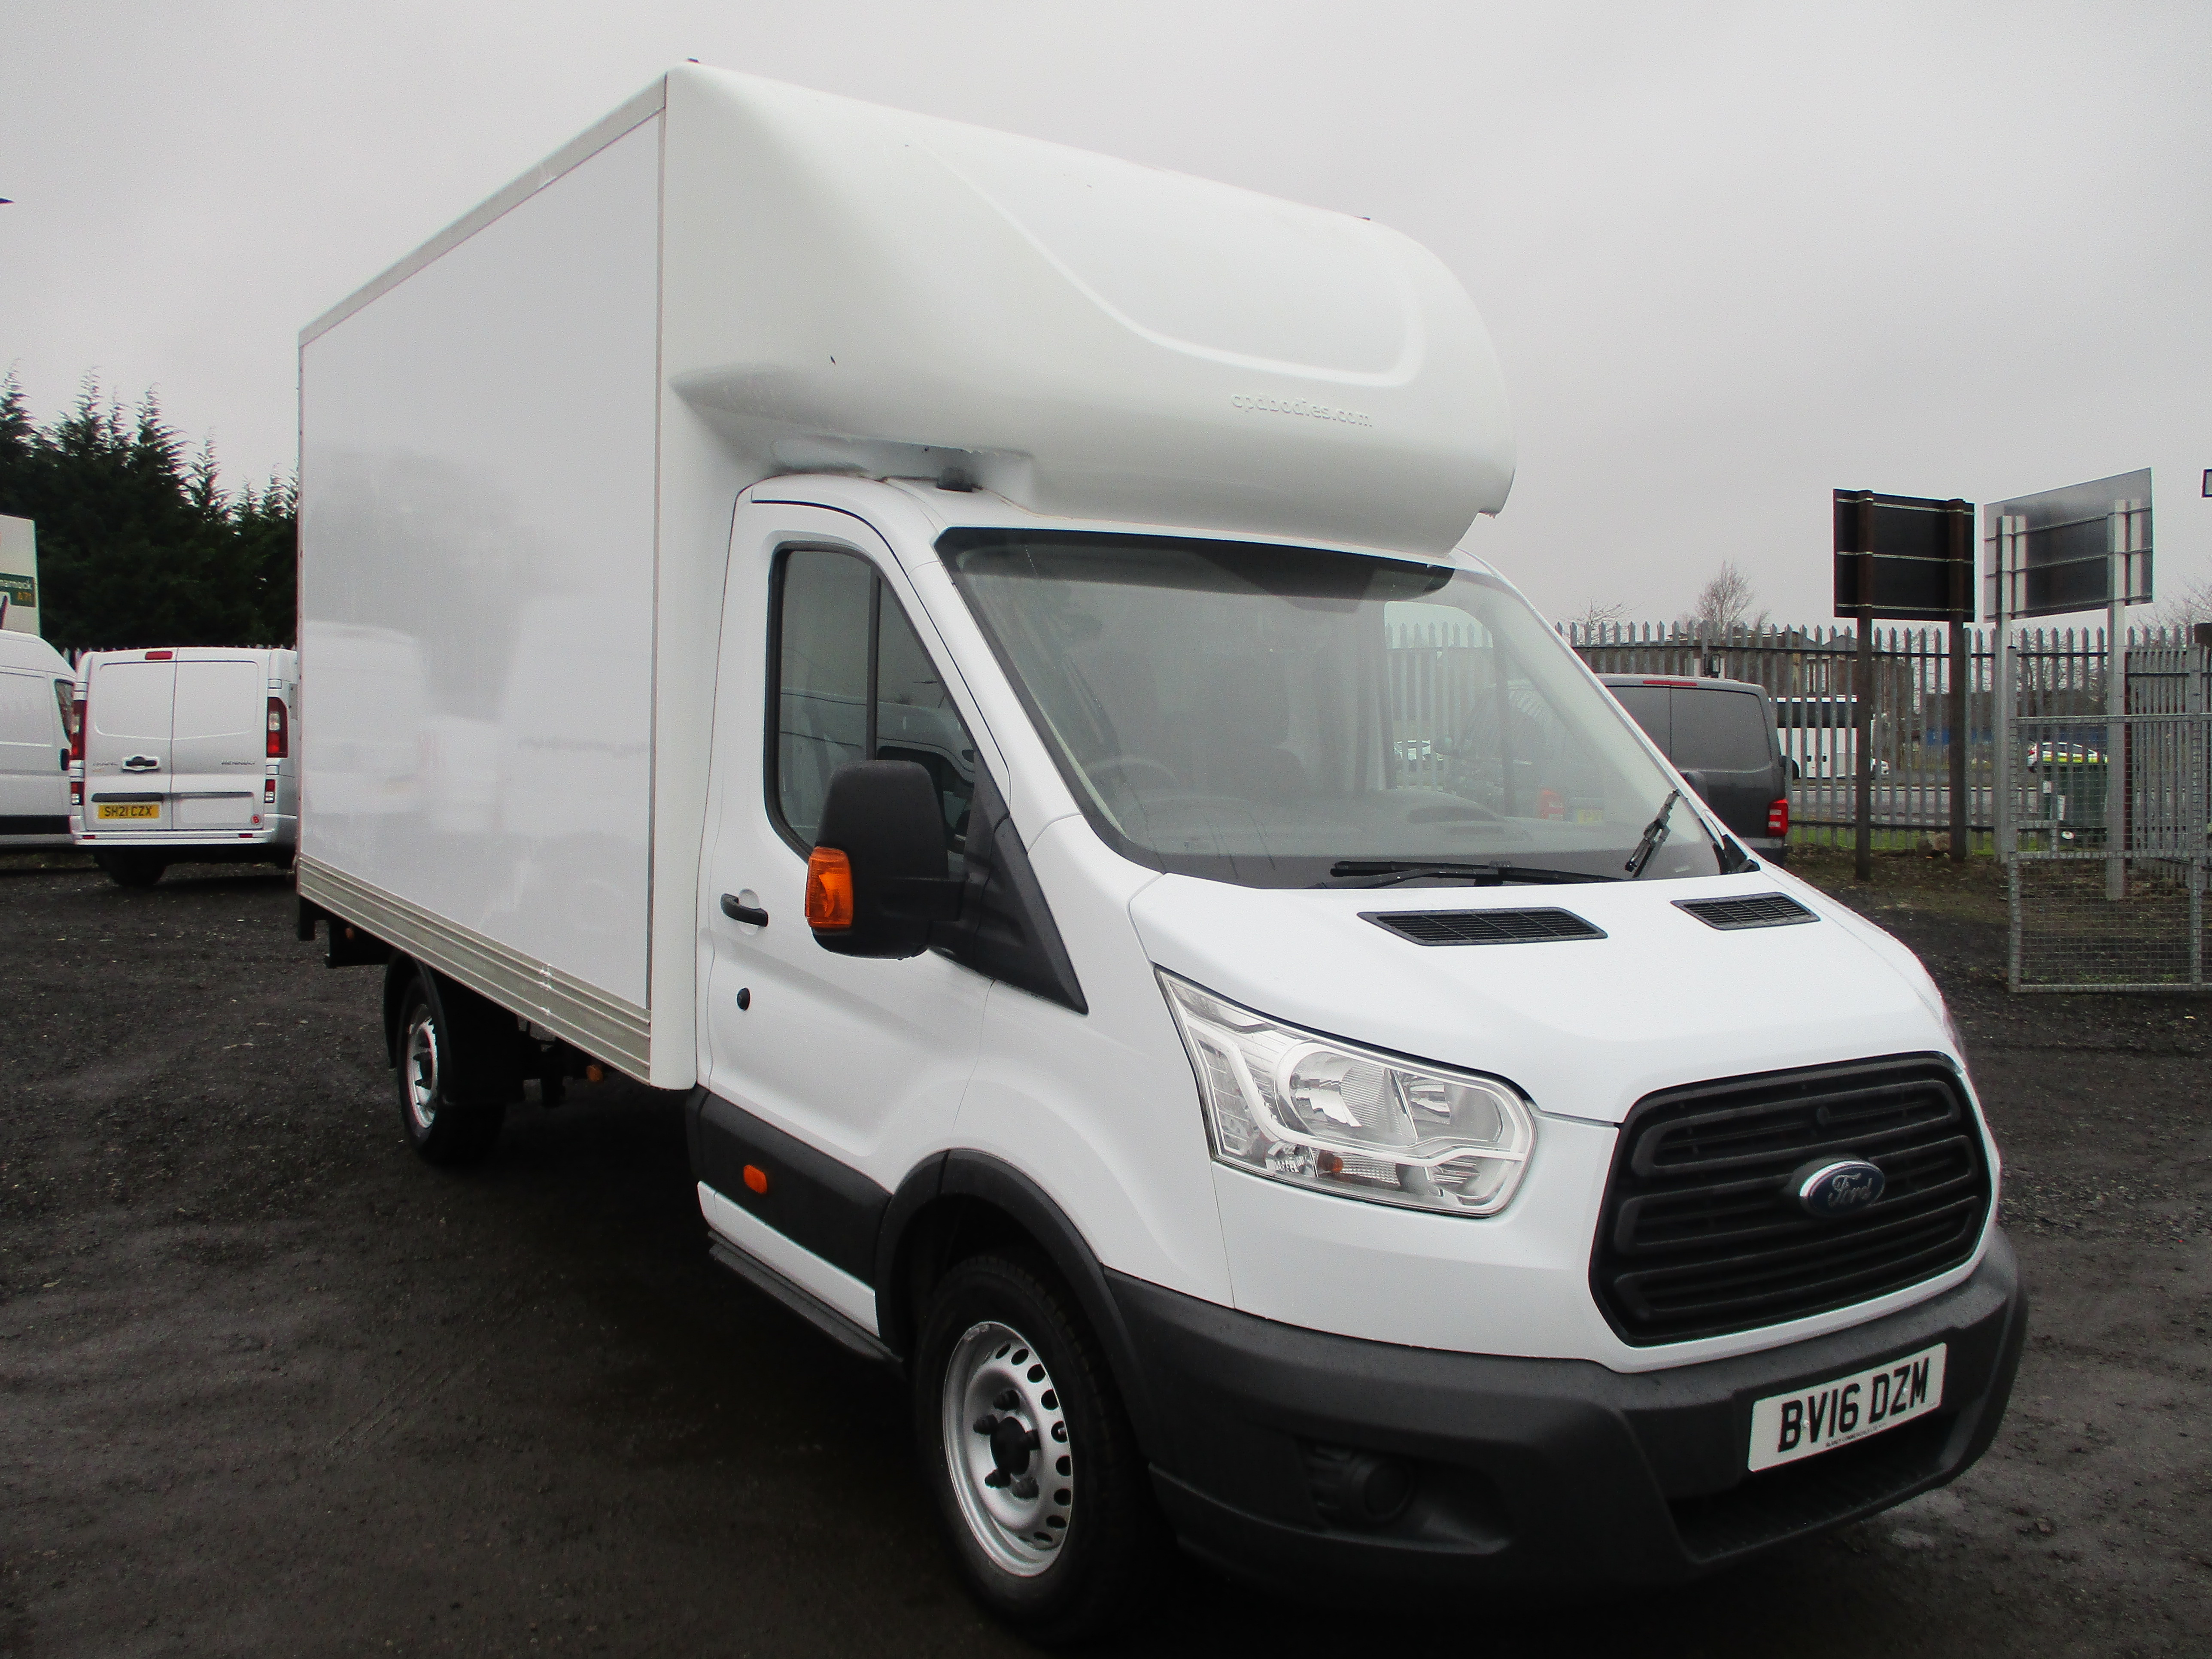 Ford Transit 350 L4 2.2 TDCi 125PS 'One Stop' Luton Van with Tail Lift